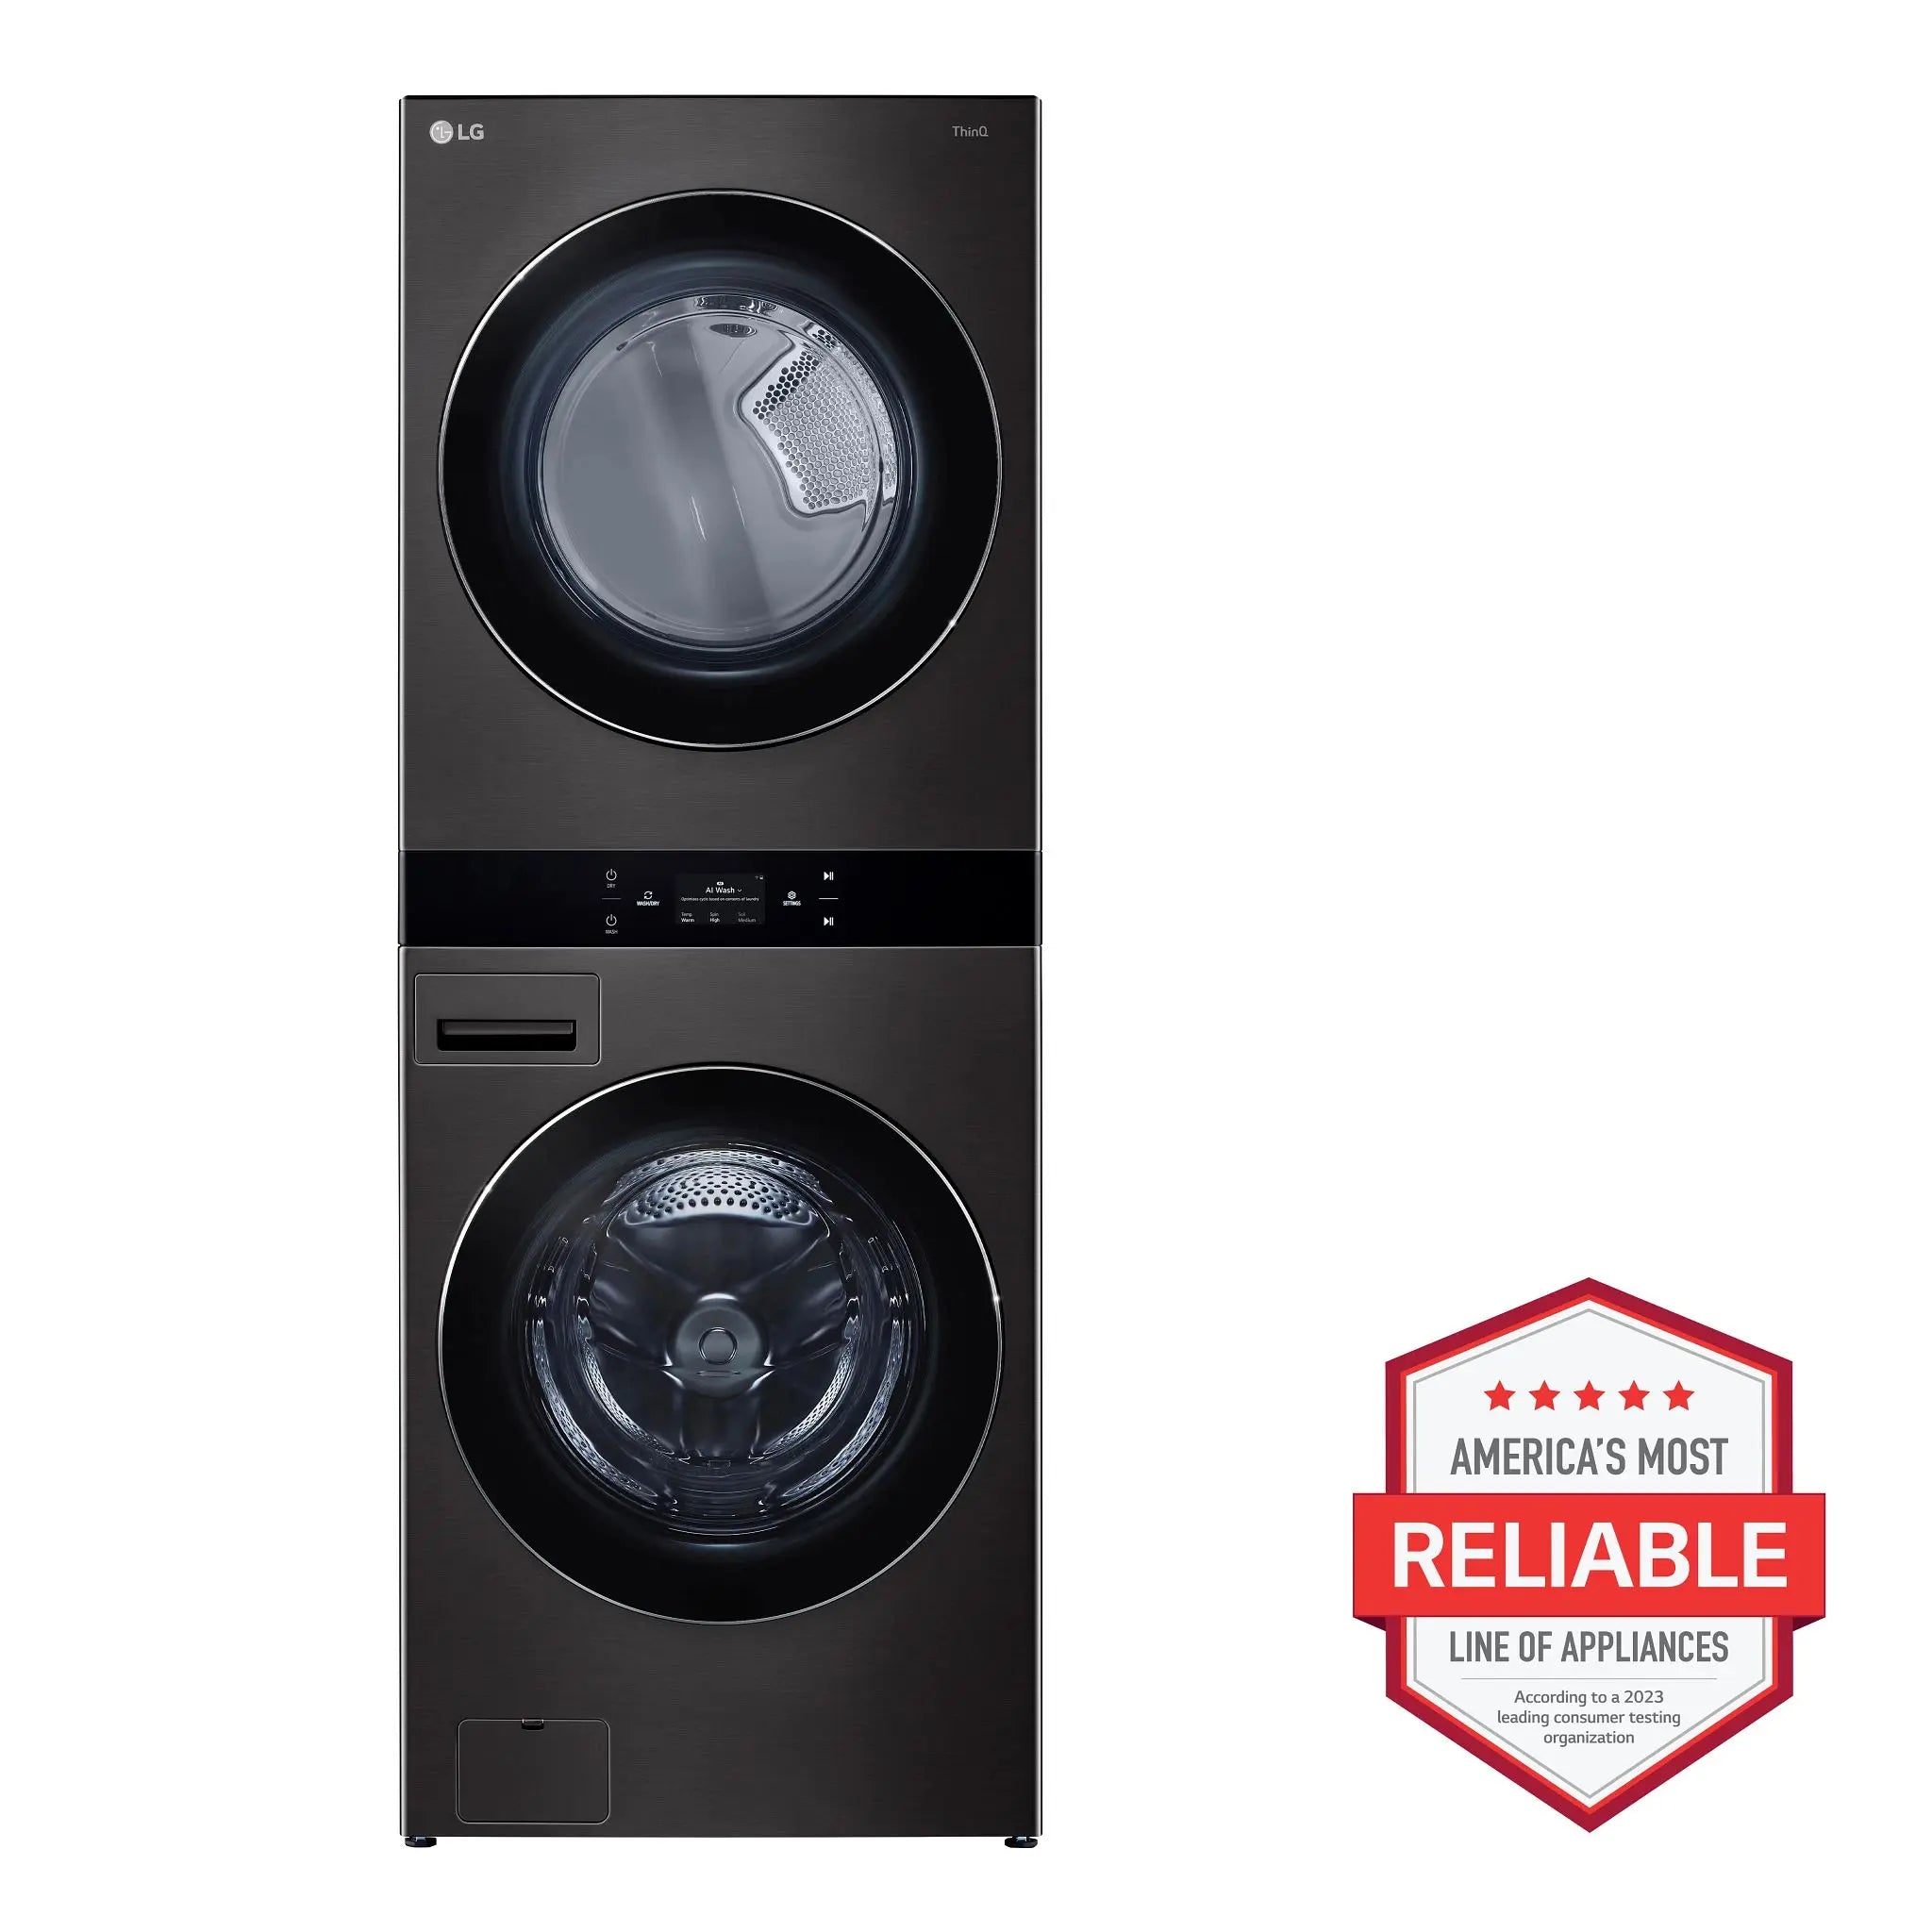 (WKEX300HBA) Single Unit Front Load LG WashTower with Center Control 5.0 cu.ft. Washer & 7.4 cu.ft. Electric Dryer